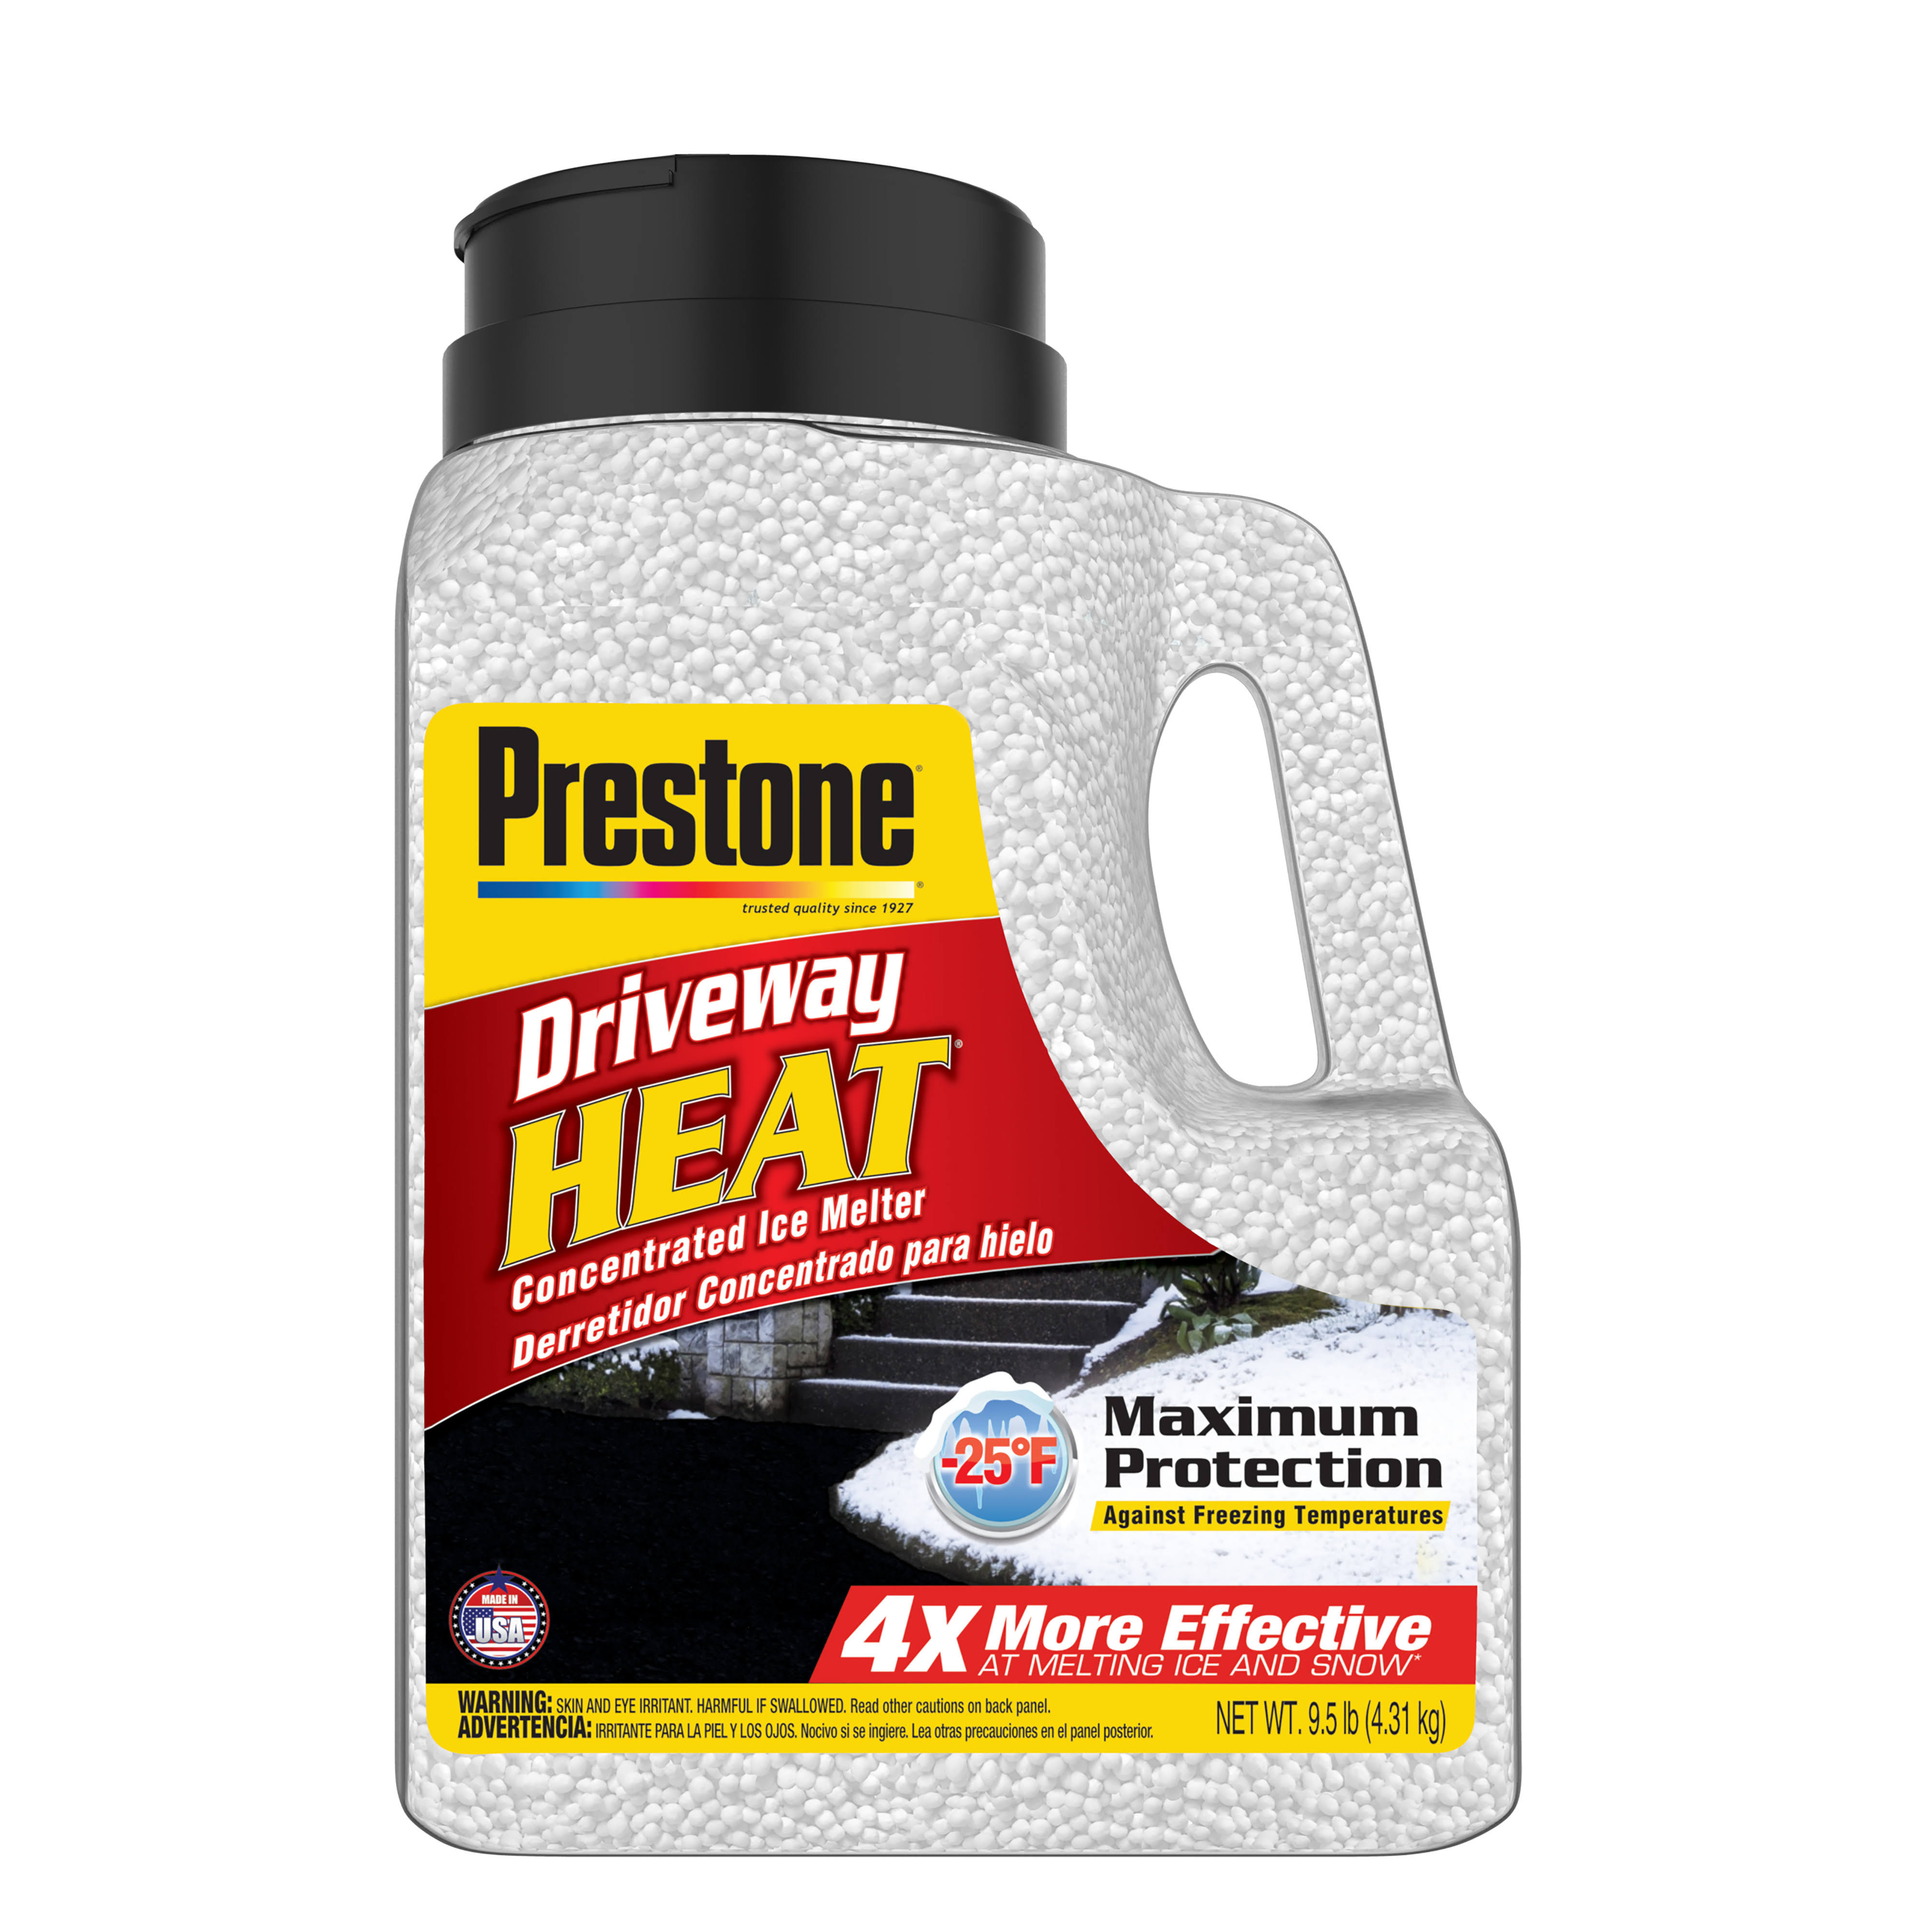 Scotwood Industries Prestone Driveway Heat Concentrated Ice Melter